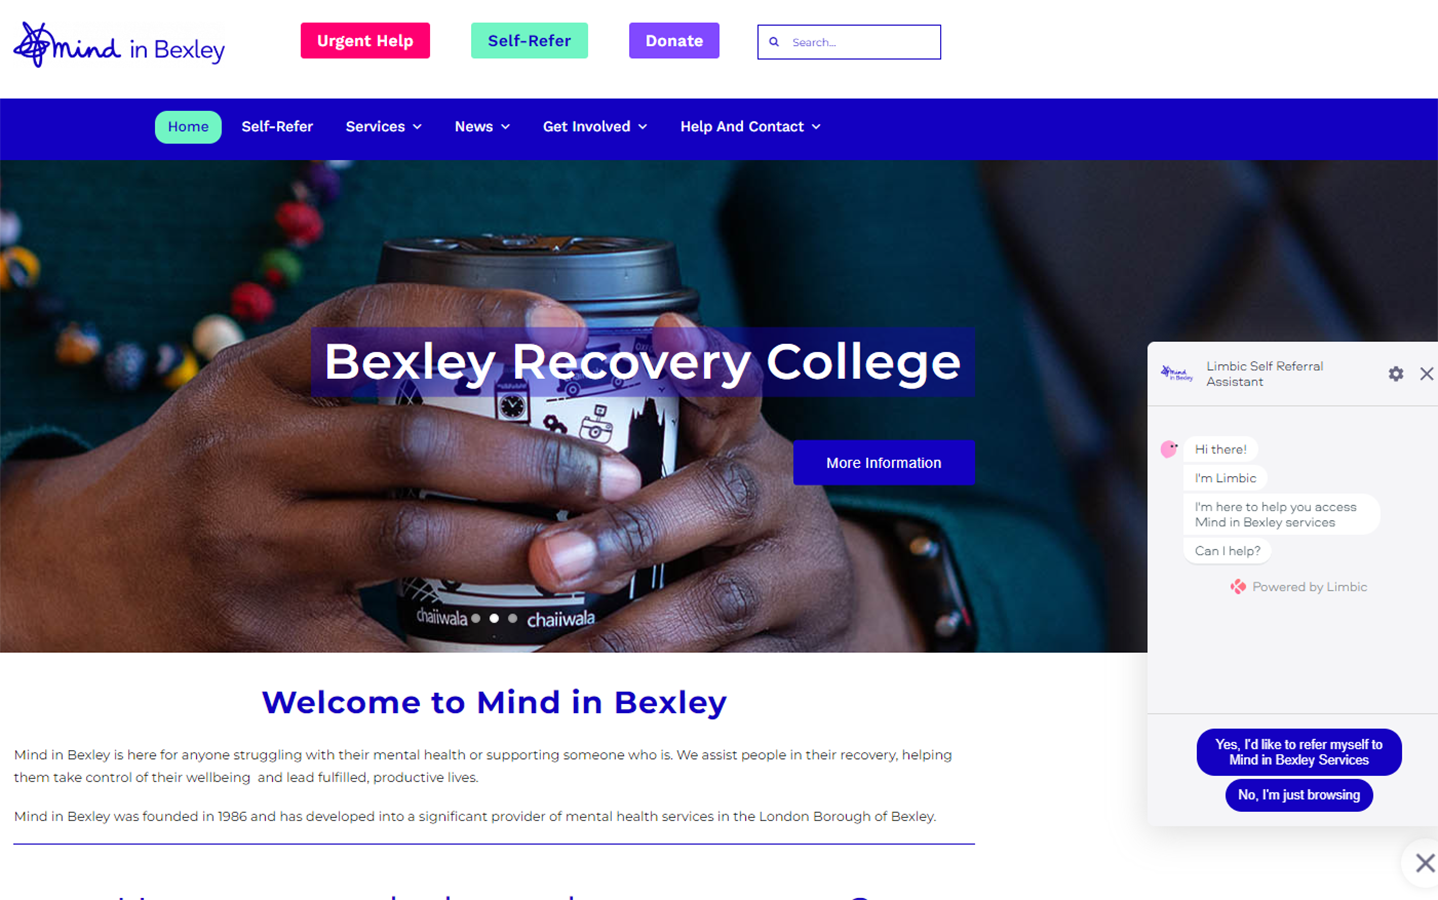 Screenshot of the Mind in Bexley website featuring the new Limbic assistant